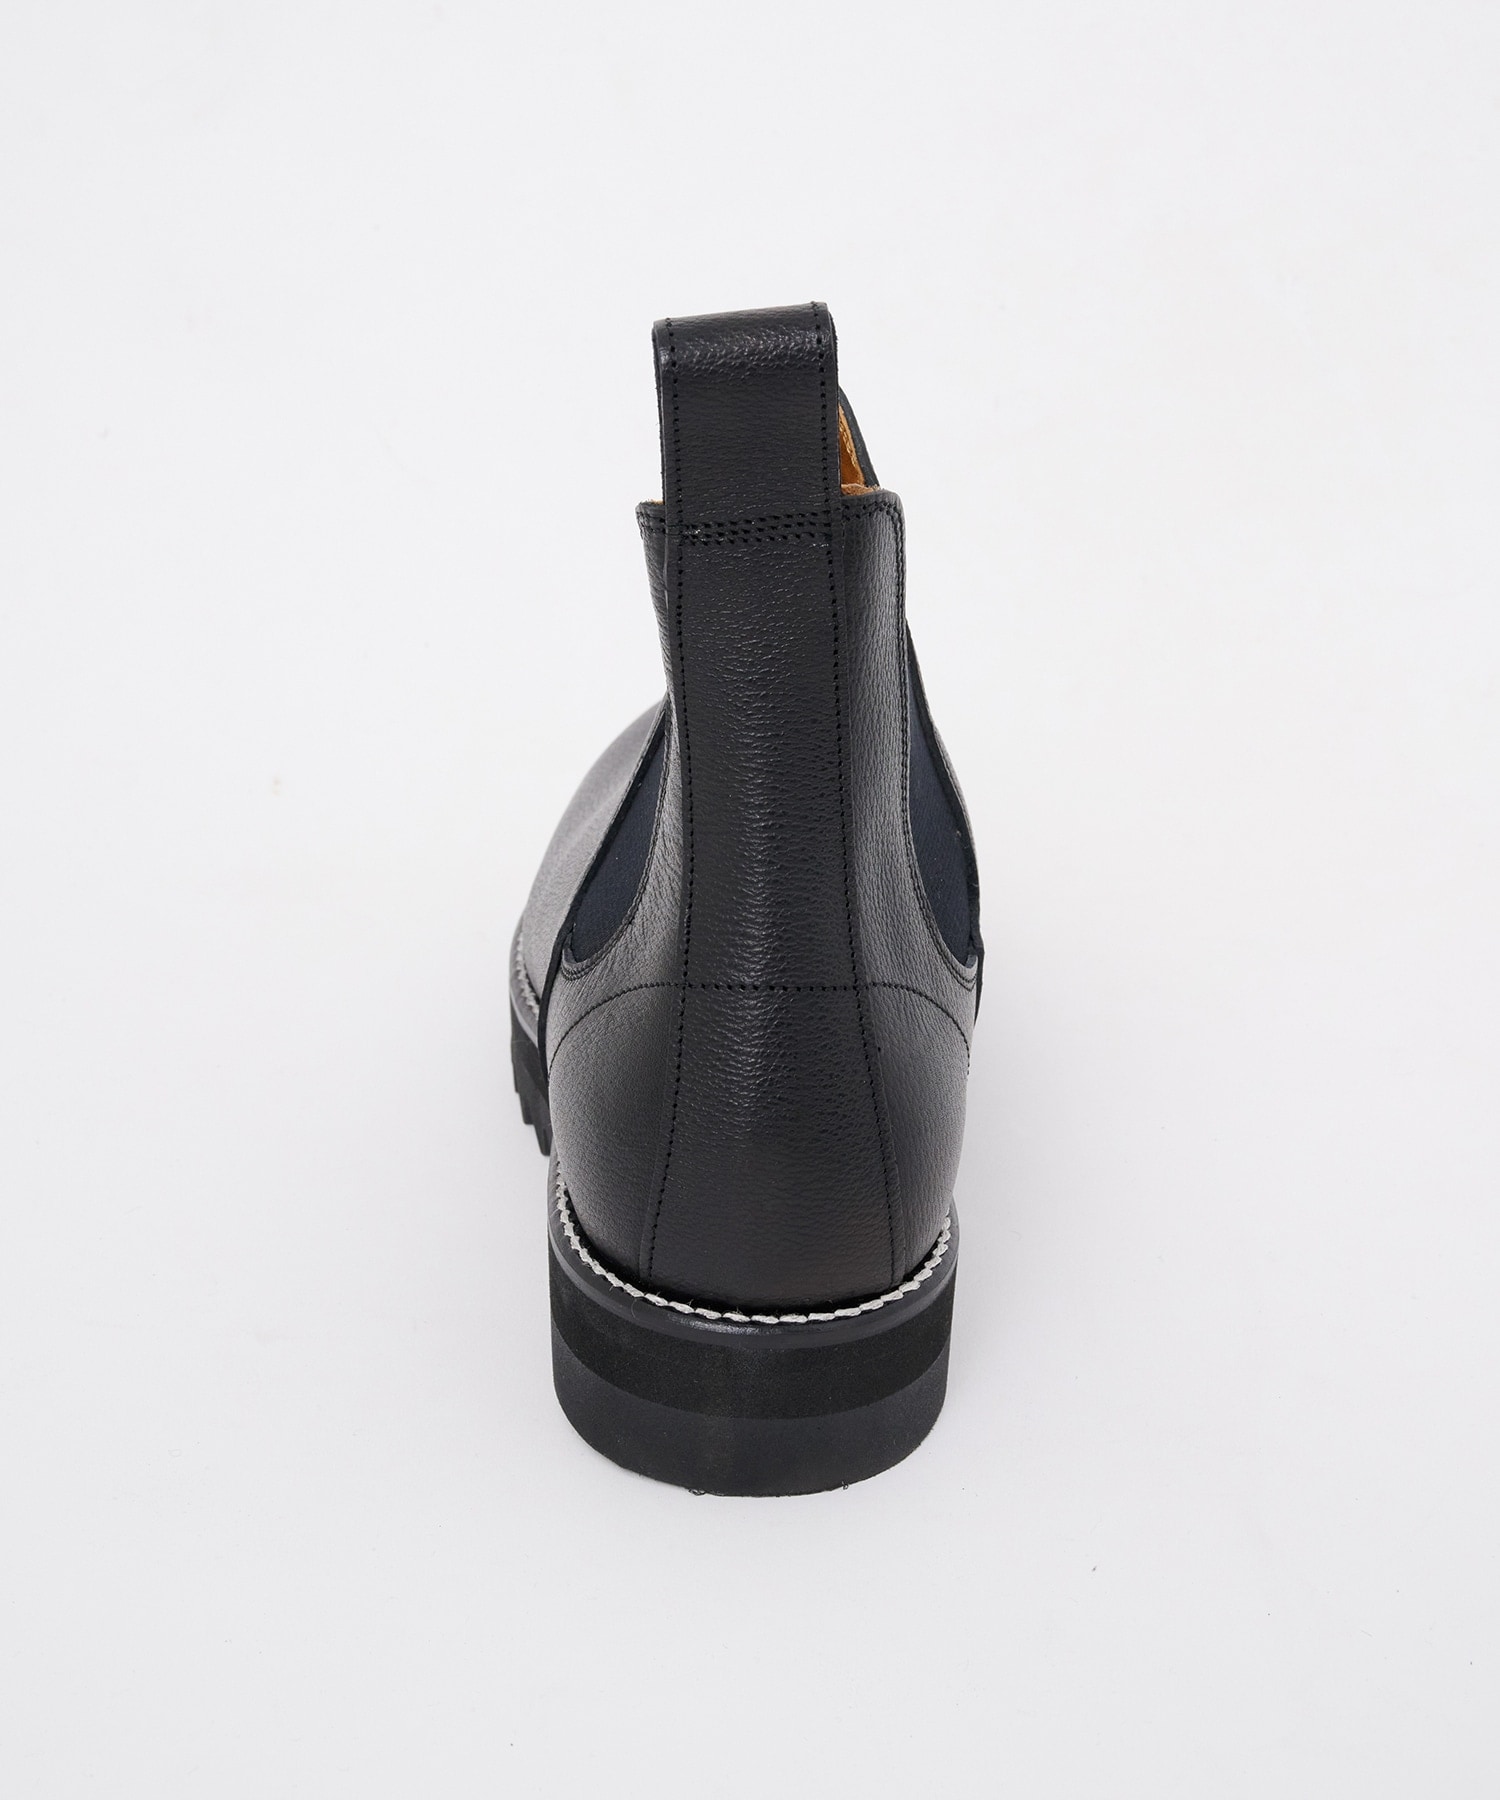 CHELSEA BOOTS Tomo & Co.